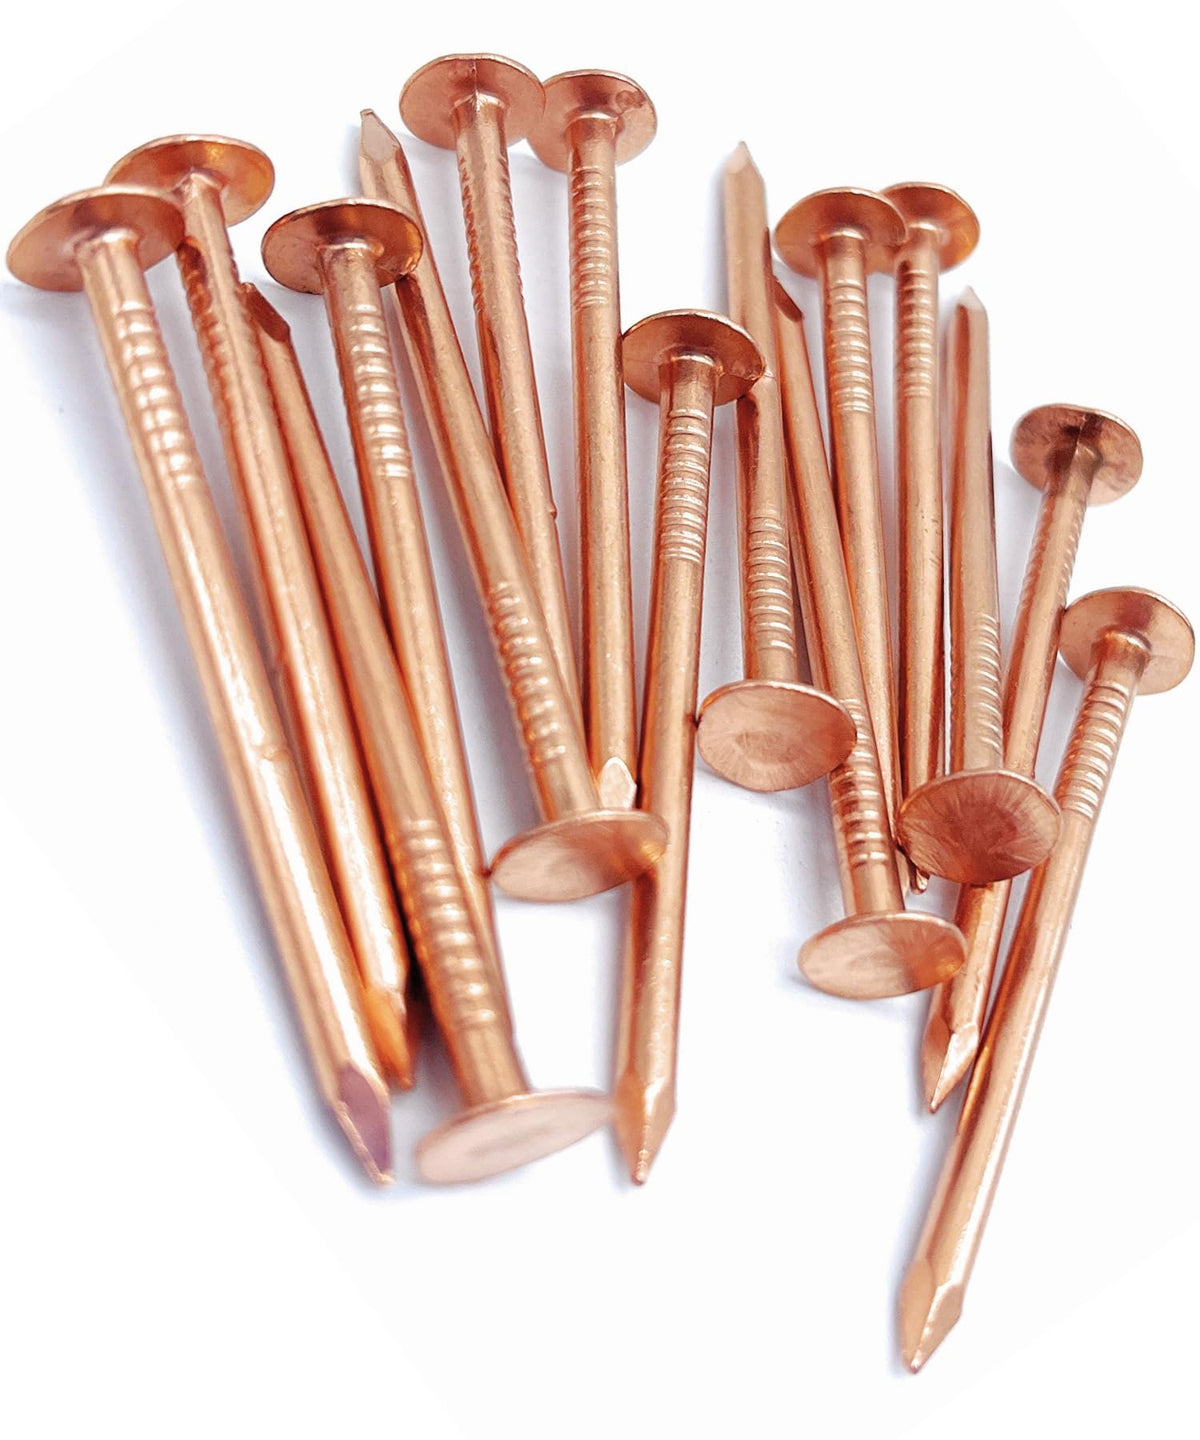 2 Inch Copper Nails Roofing Finish Nails USA MADE - Solid Pure Copper Slating Nails Spikes Flashing Furniture Boat - Package Includes The Highest Quality Copper Nails by Dubbs Hardware